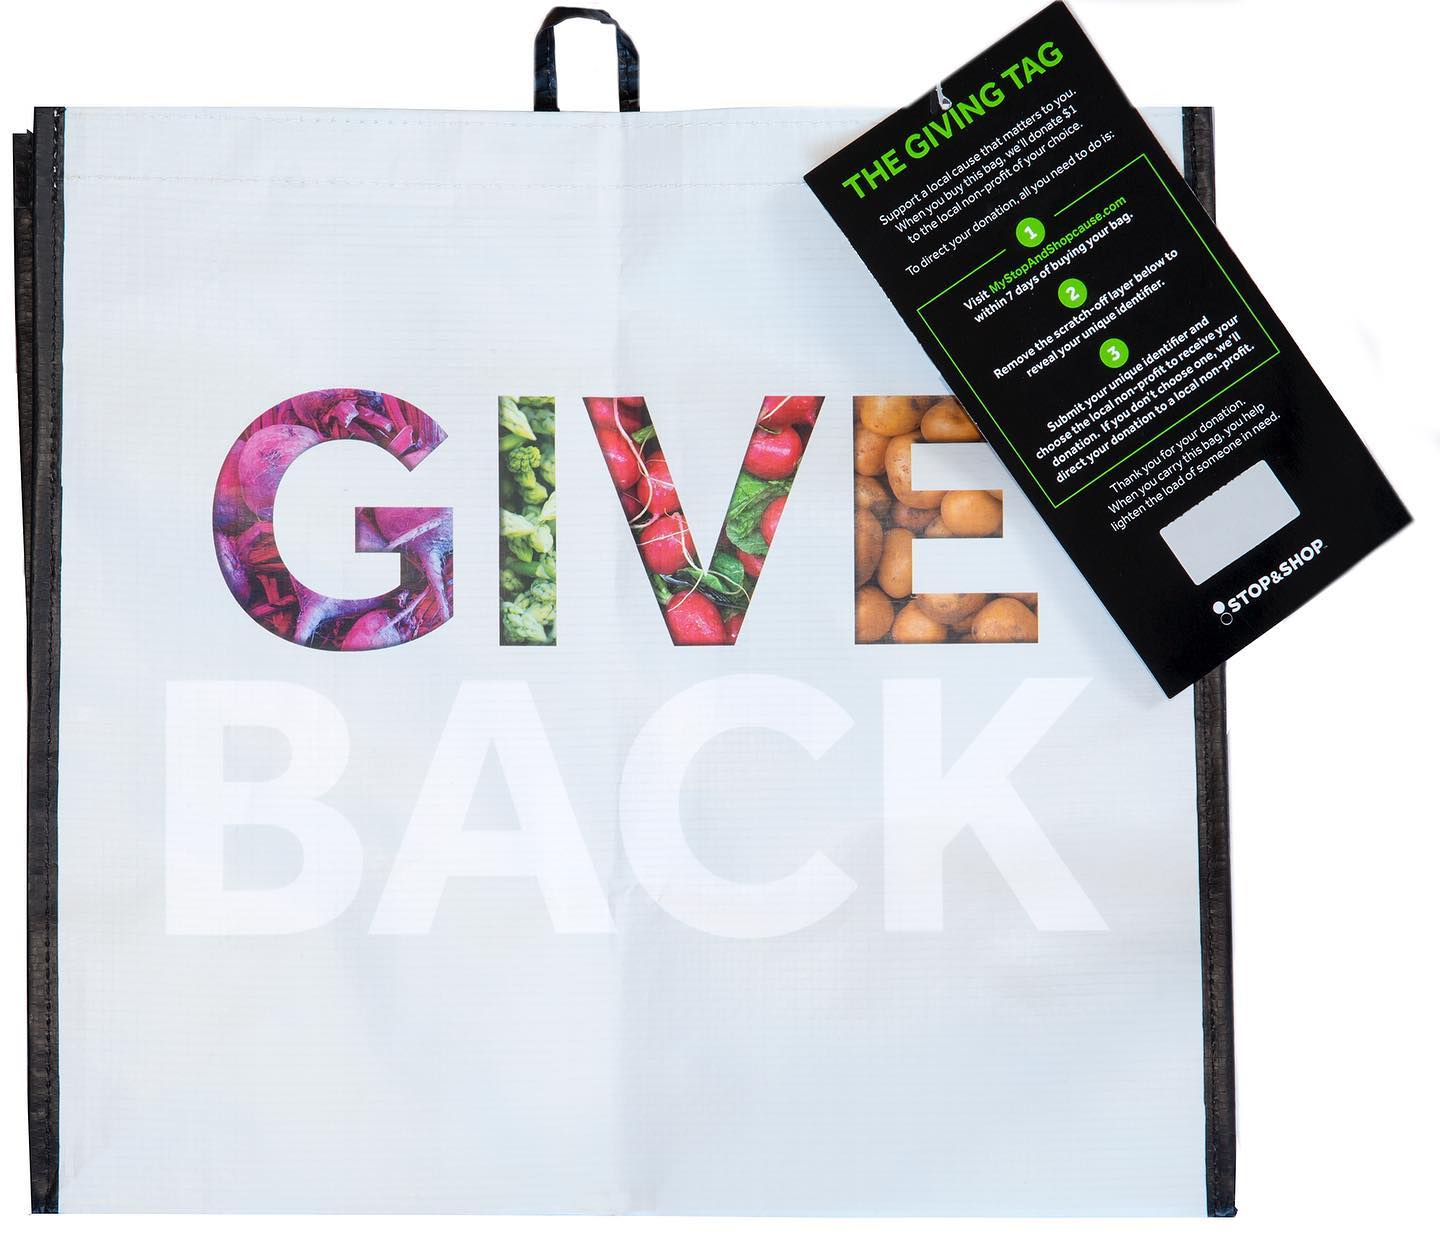 Hyde Square Task Force was selected as the beneficiary for the month of June by local store leadership at the Stop & Shop located at 301 Centre street in Jamaica Plain! HSTF will receive a $1 donation for every $2.50 reusable Community Bag purchased at this location in June. 
 

#giving #communitybagprogram #jamaicaplainboston